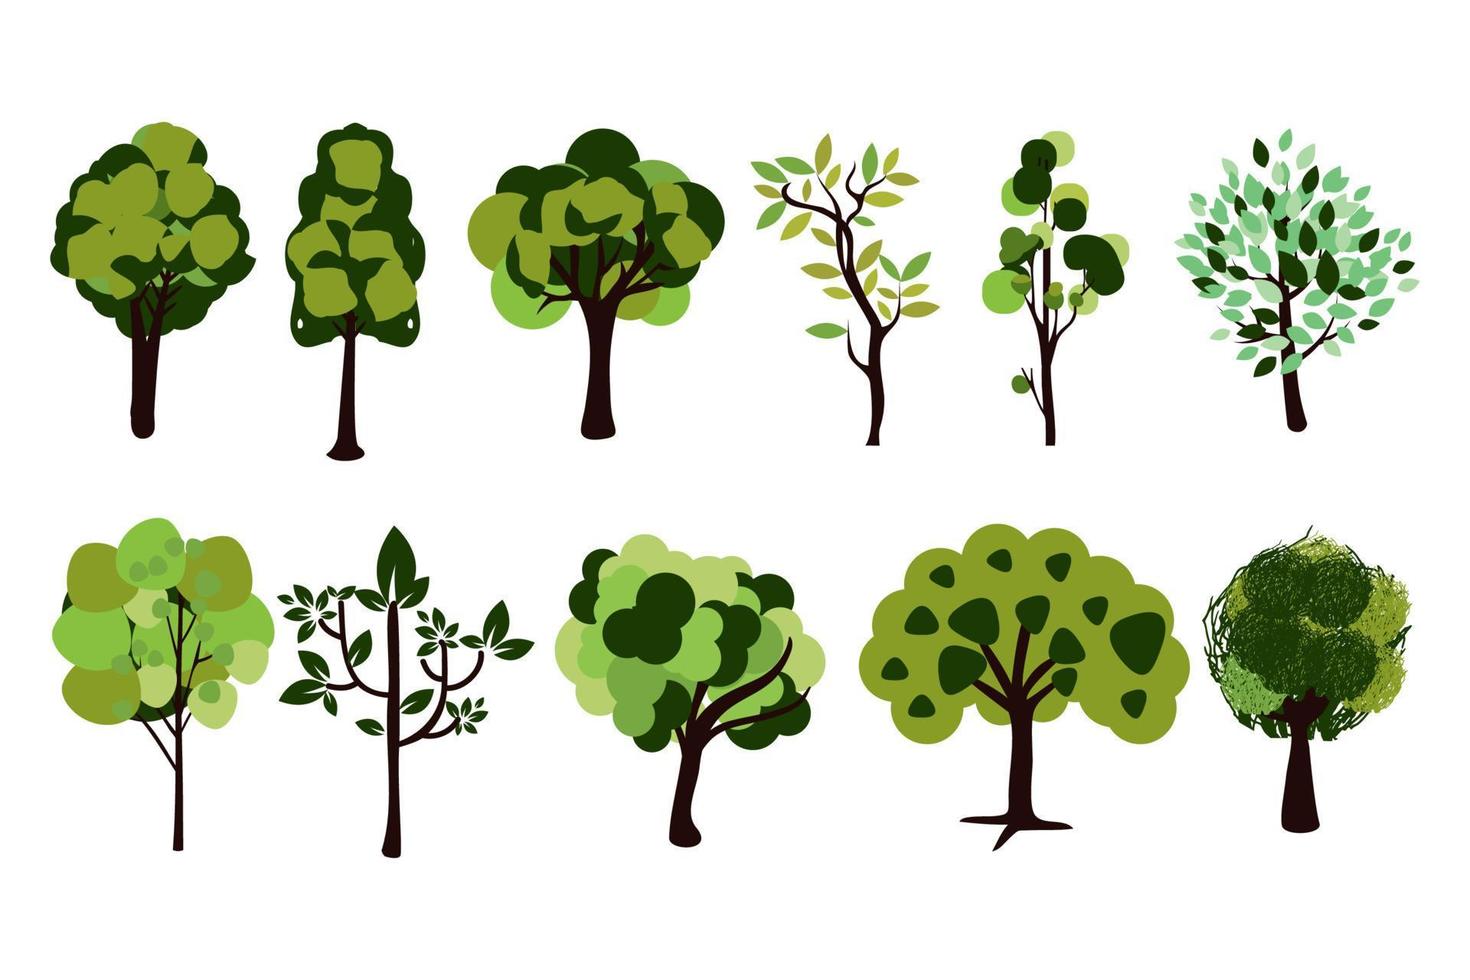 Collection of trees illustrations. Can be used to illustrate any nature or healthy lifestyle topic. vector